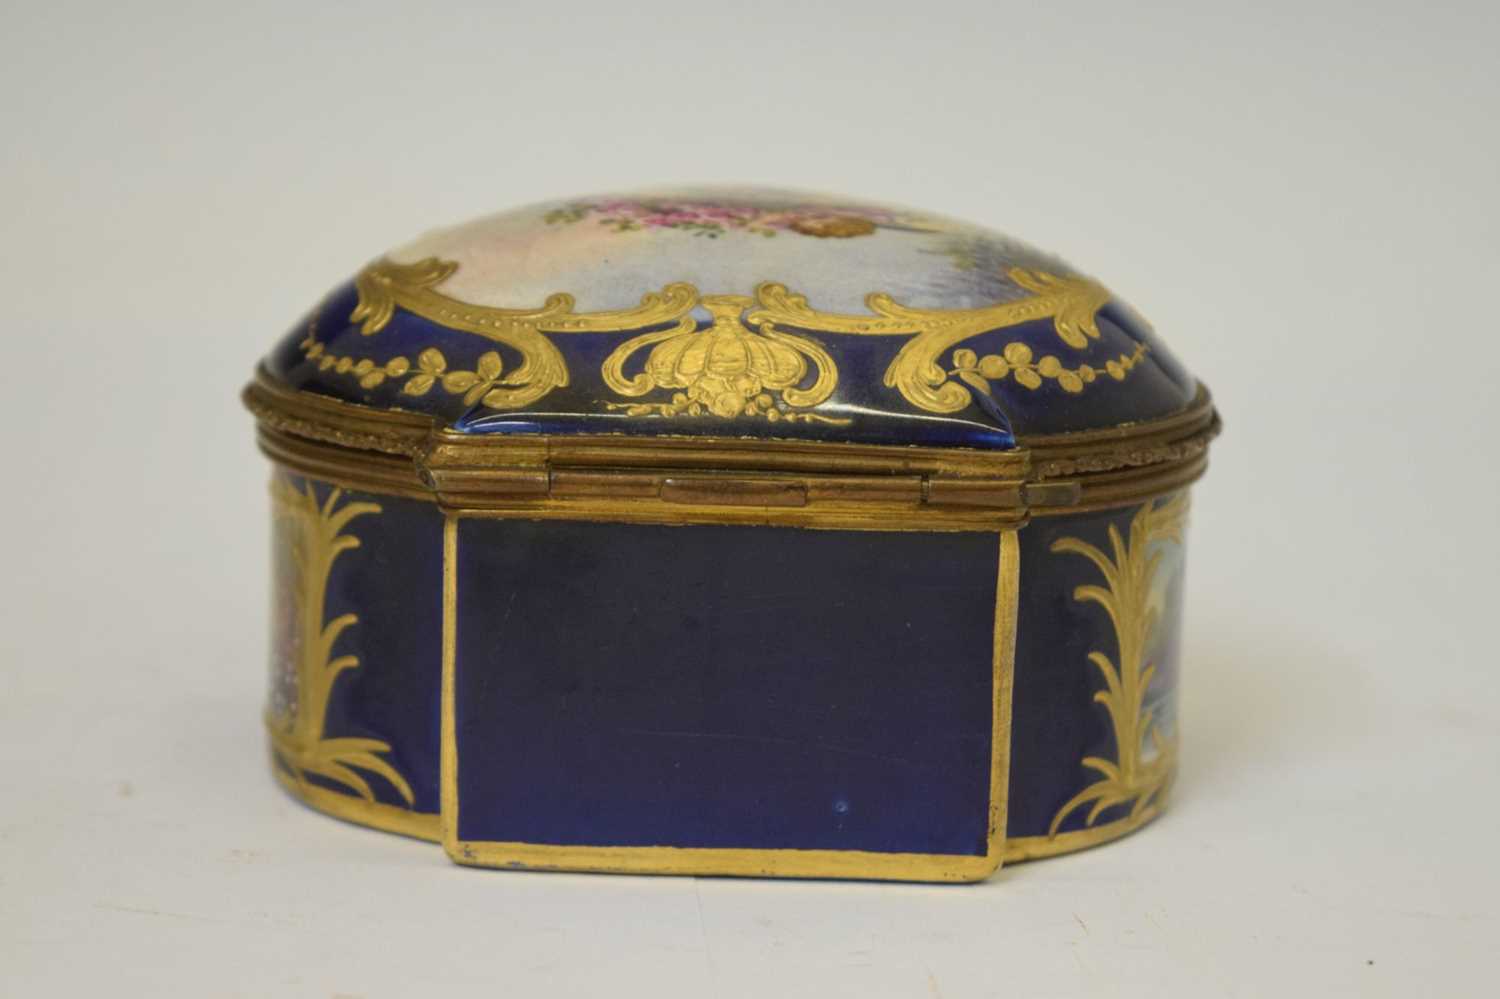 18th century-style porcelain and gilt metal box - Image 4 of 8